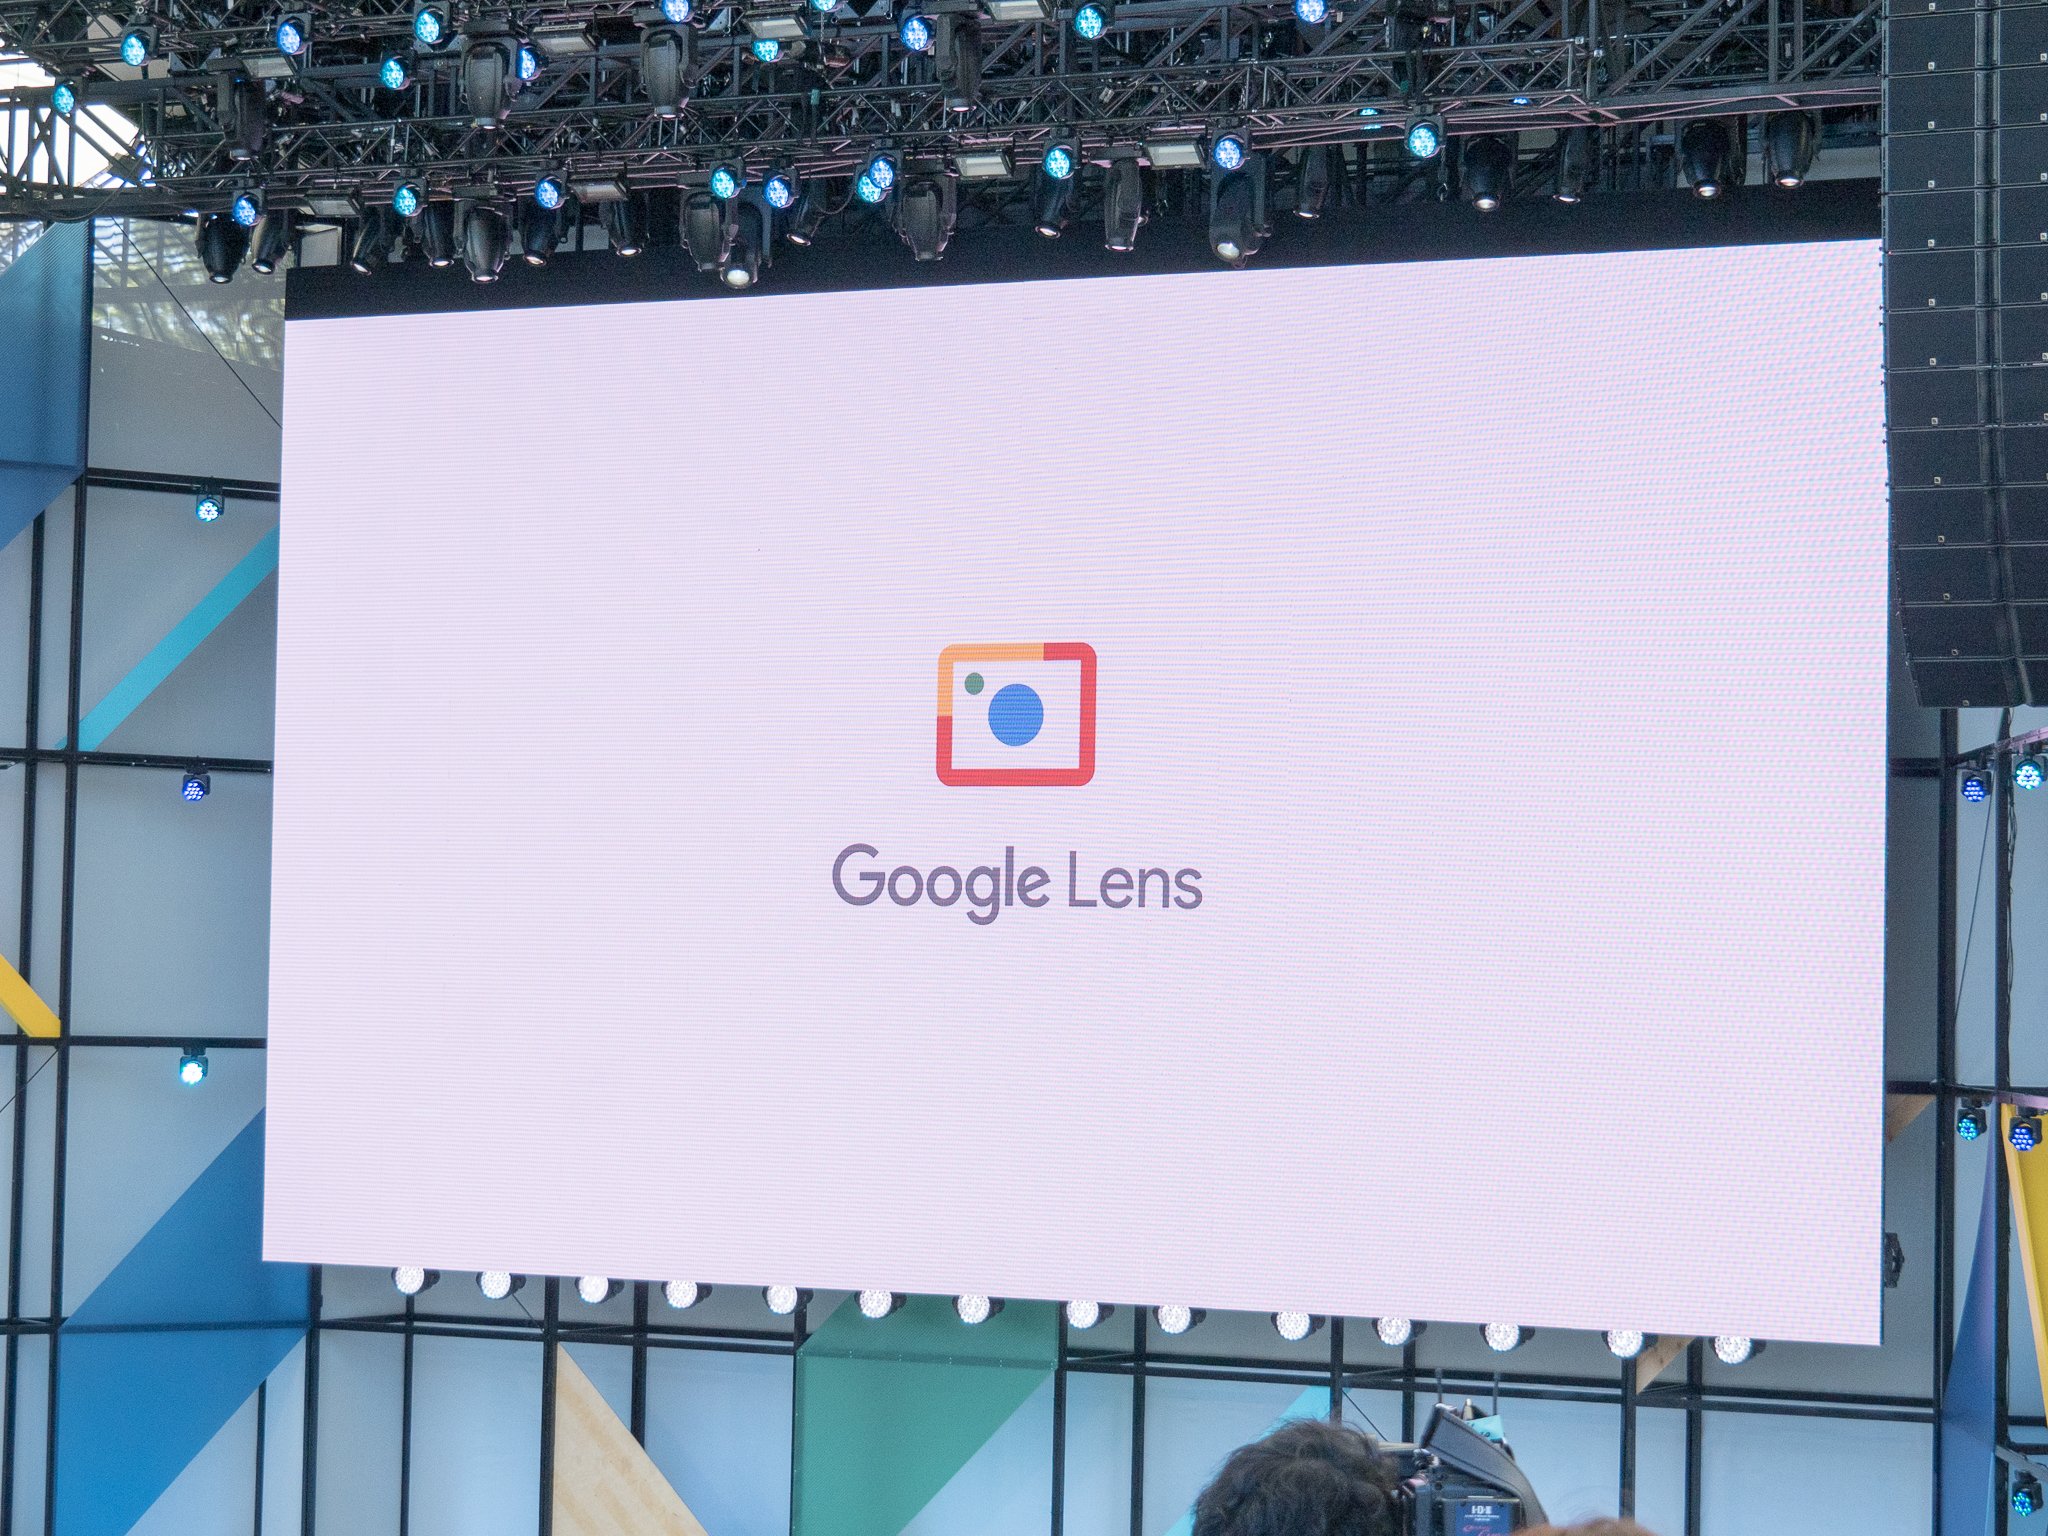 Live text translation now rolling out to Google Lens